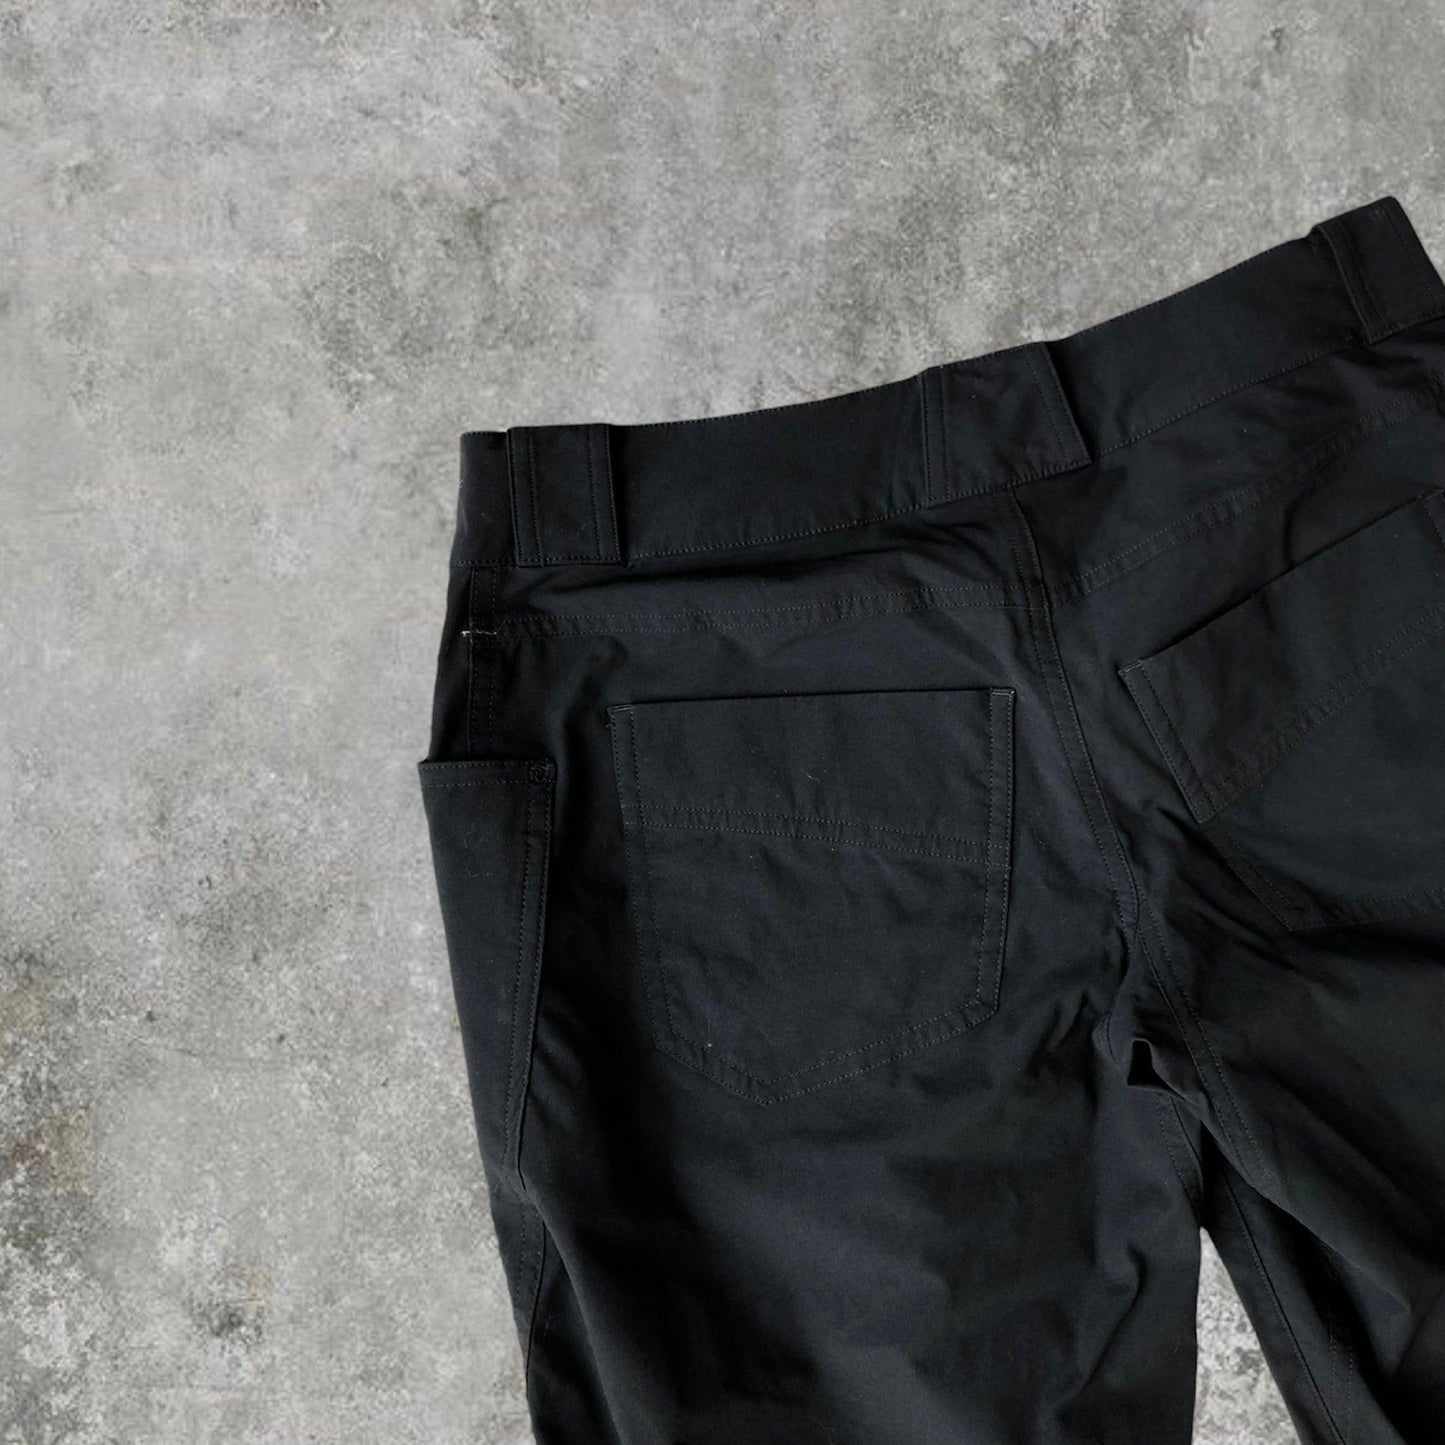 Arcteryx Hiking Trousers - Women’s - Known Source